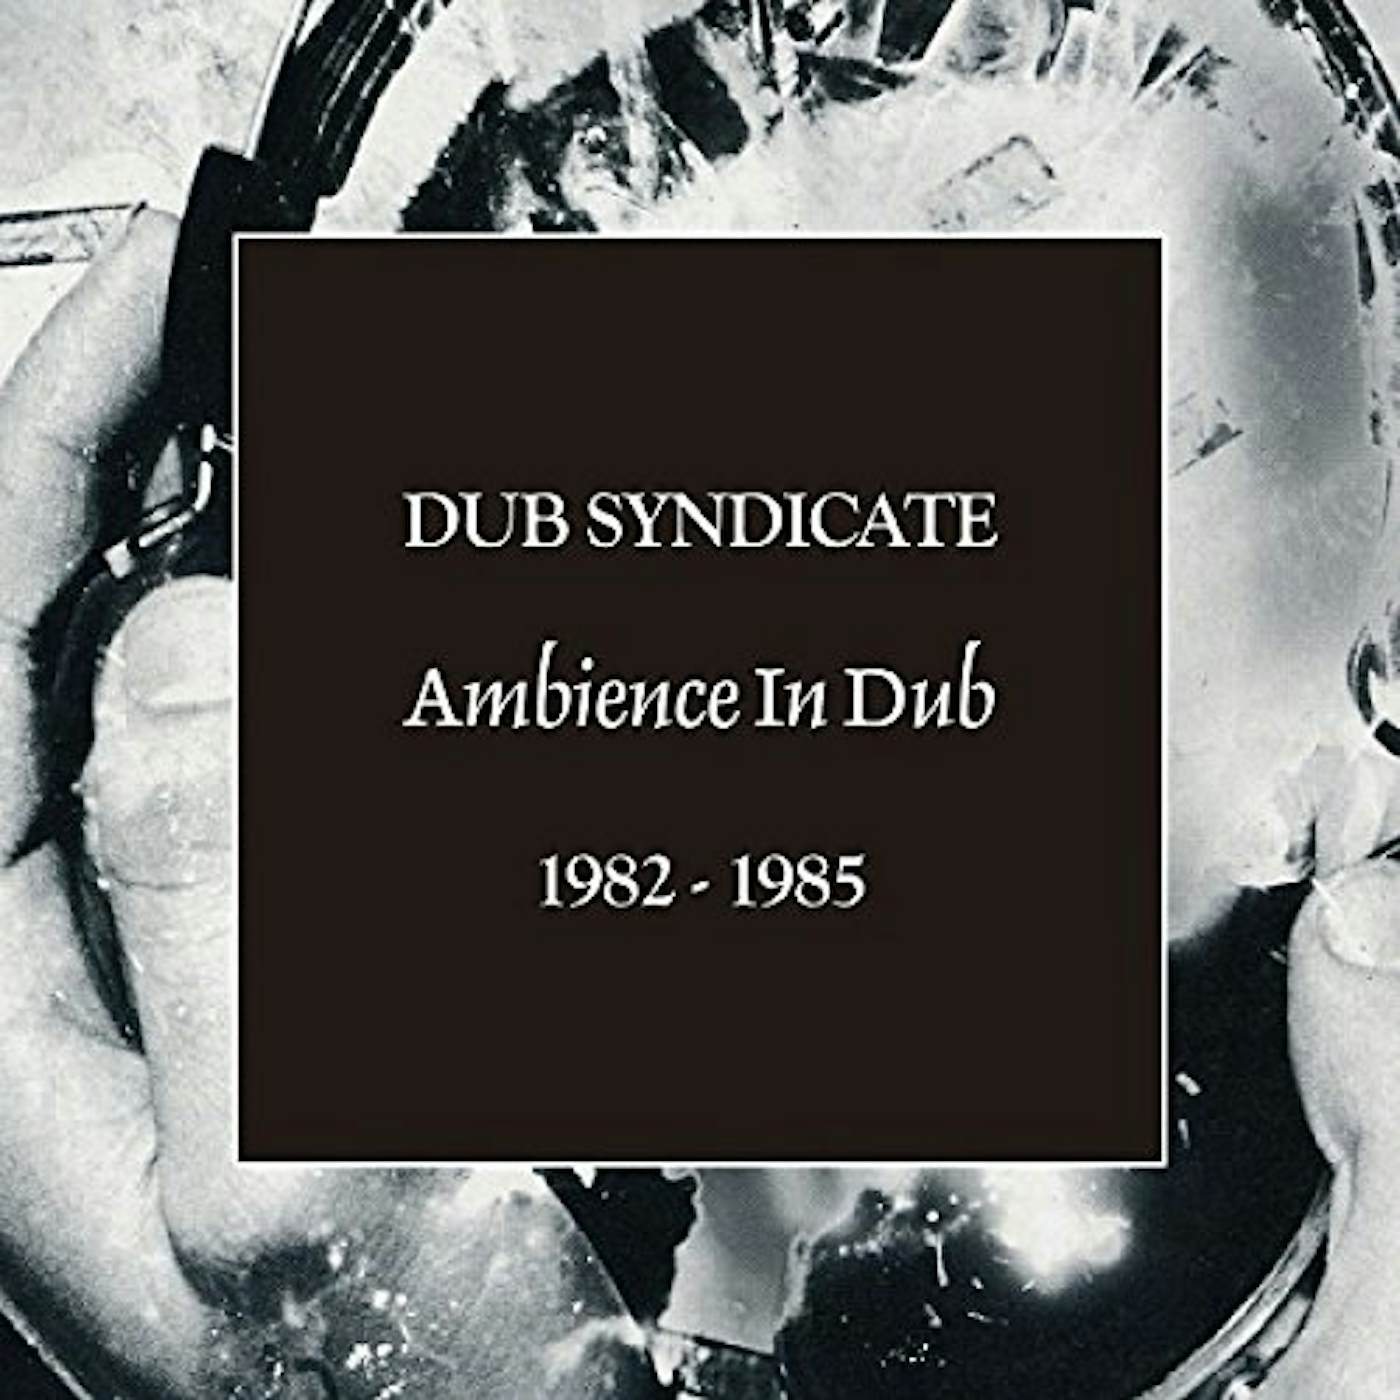 Dub Syndicate AMBIENCE IN DUB CD